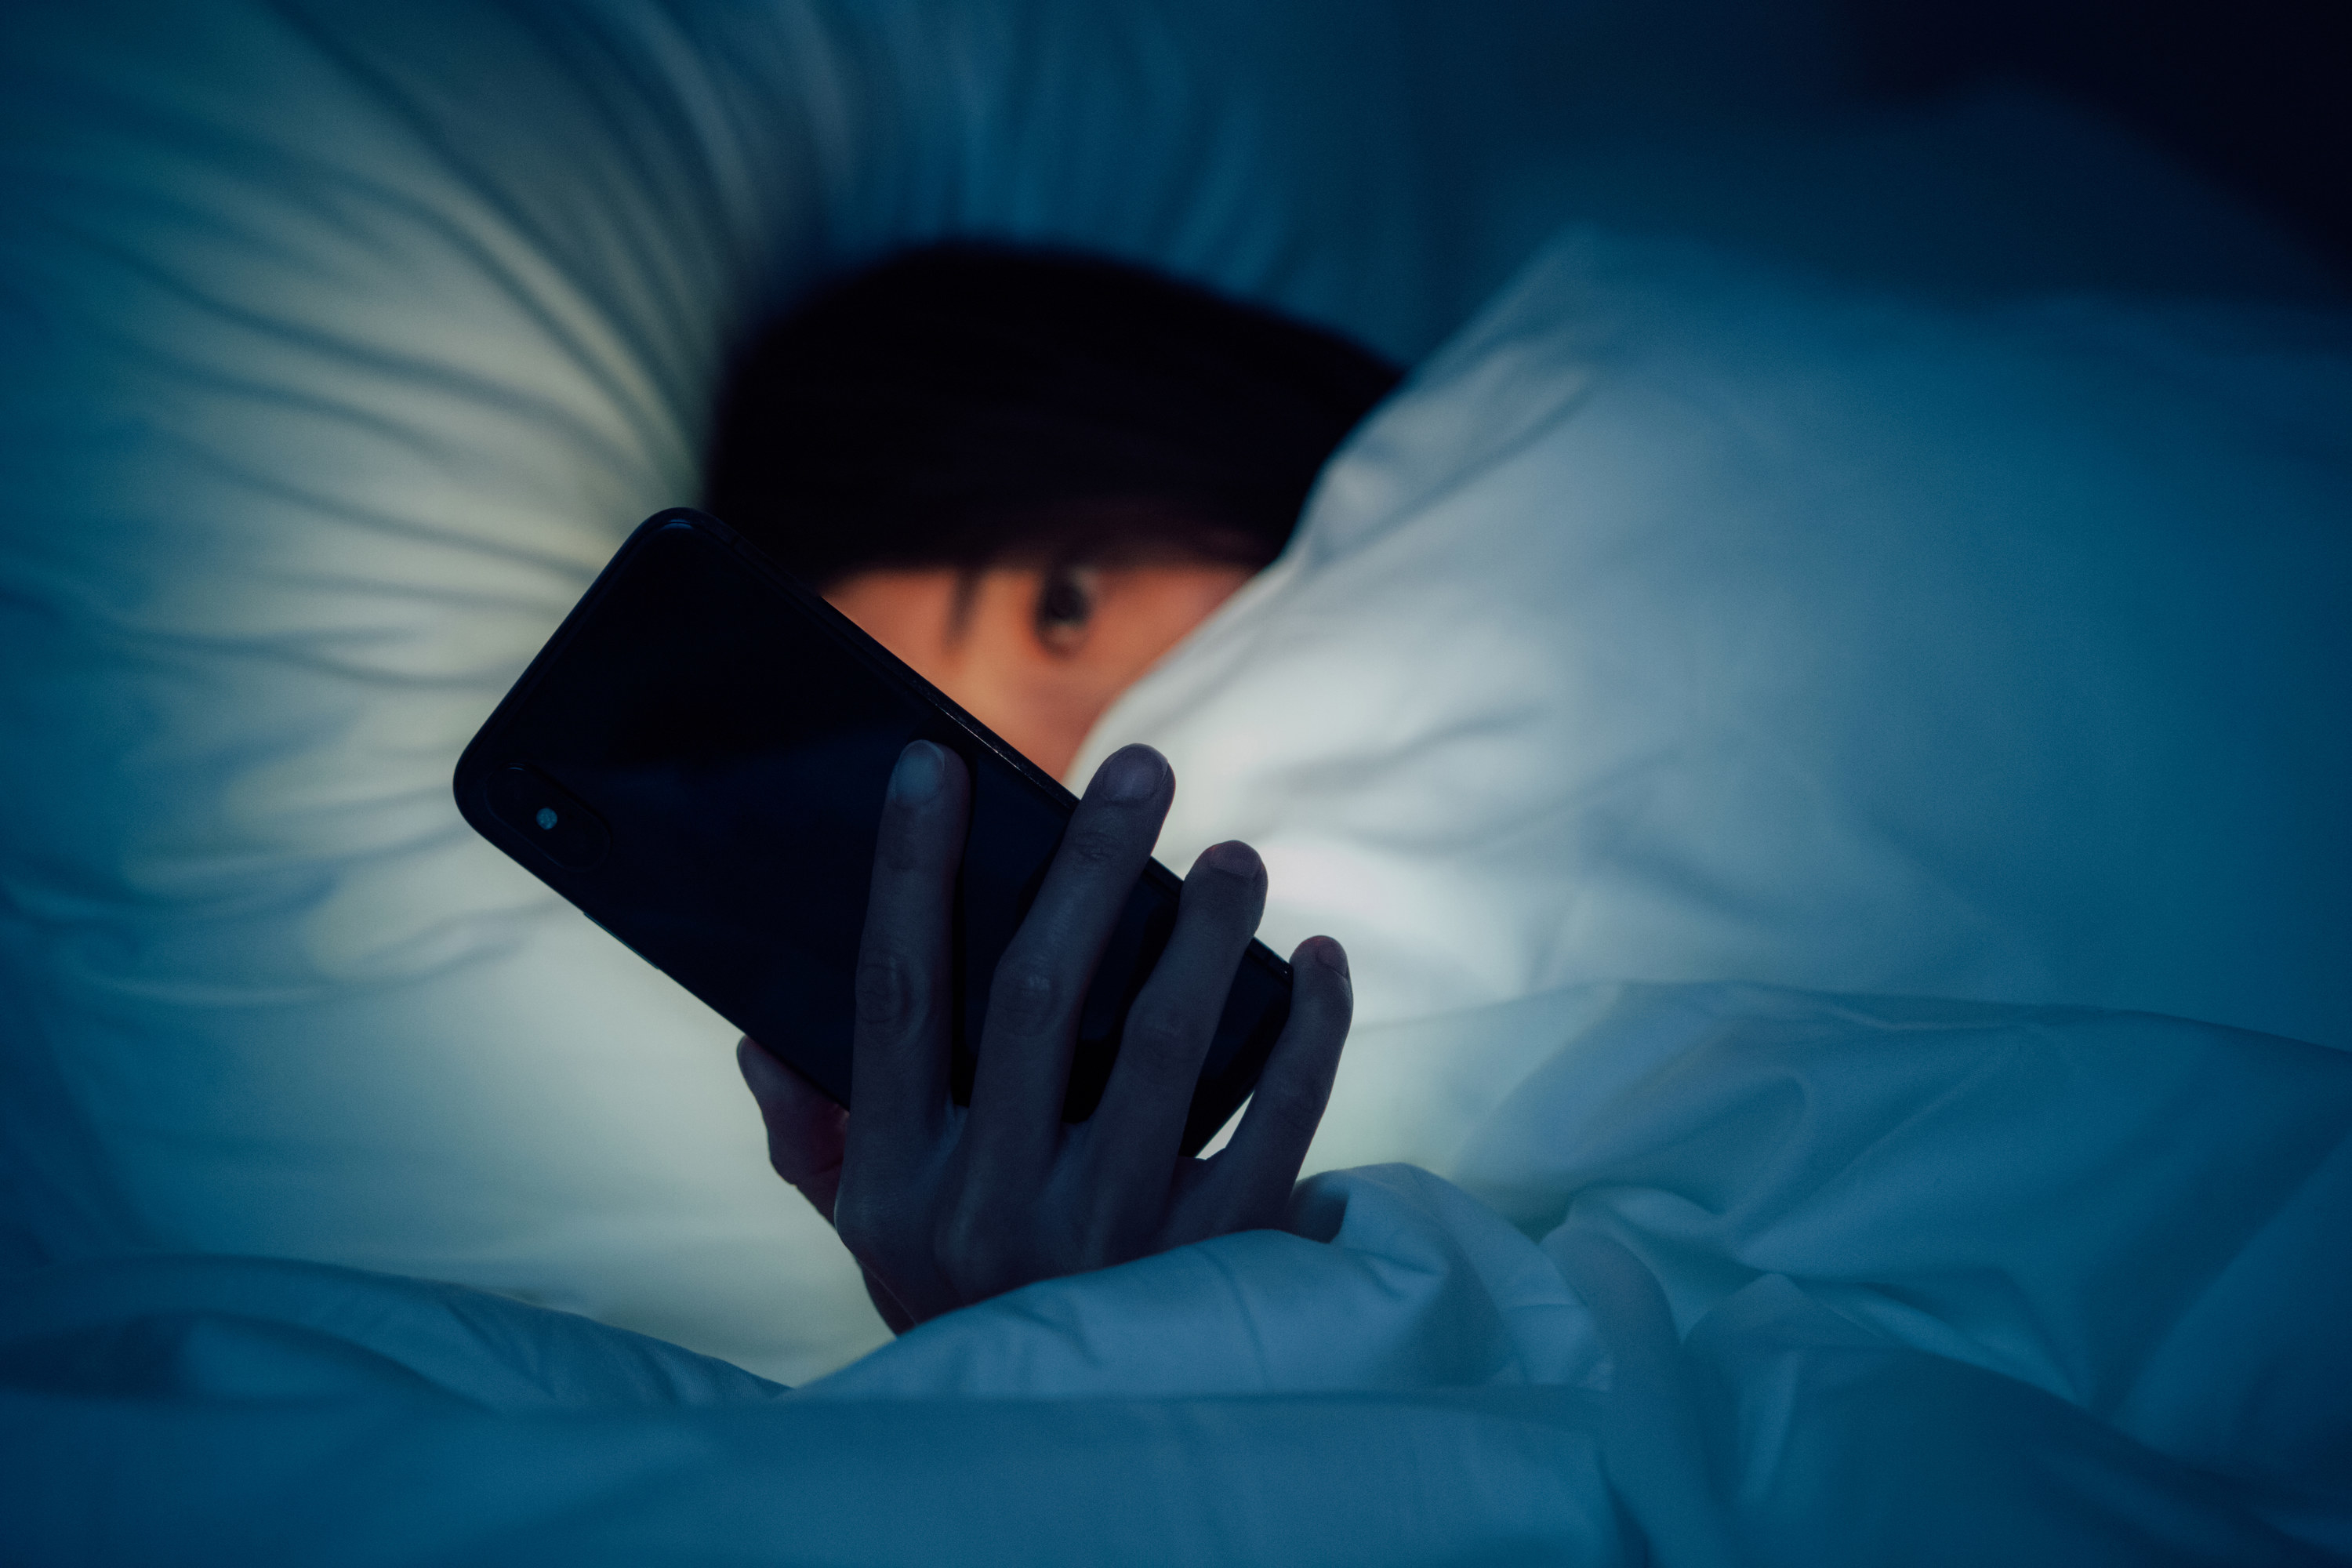 woman looking at phone in bed